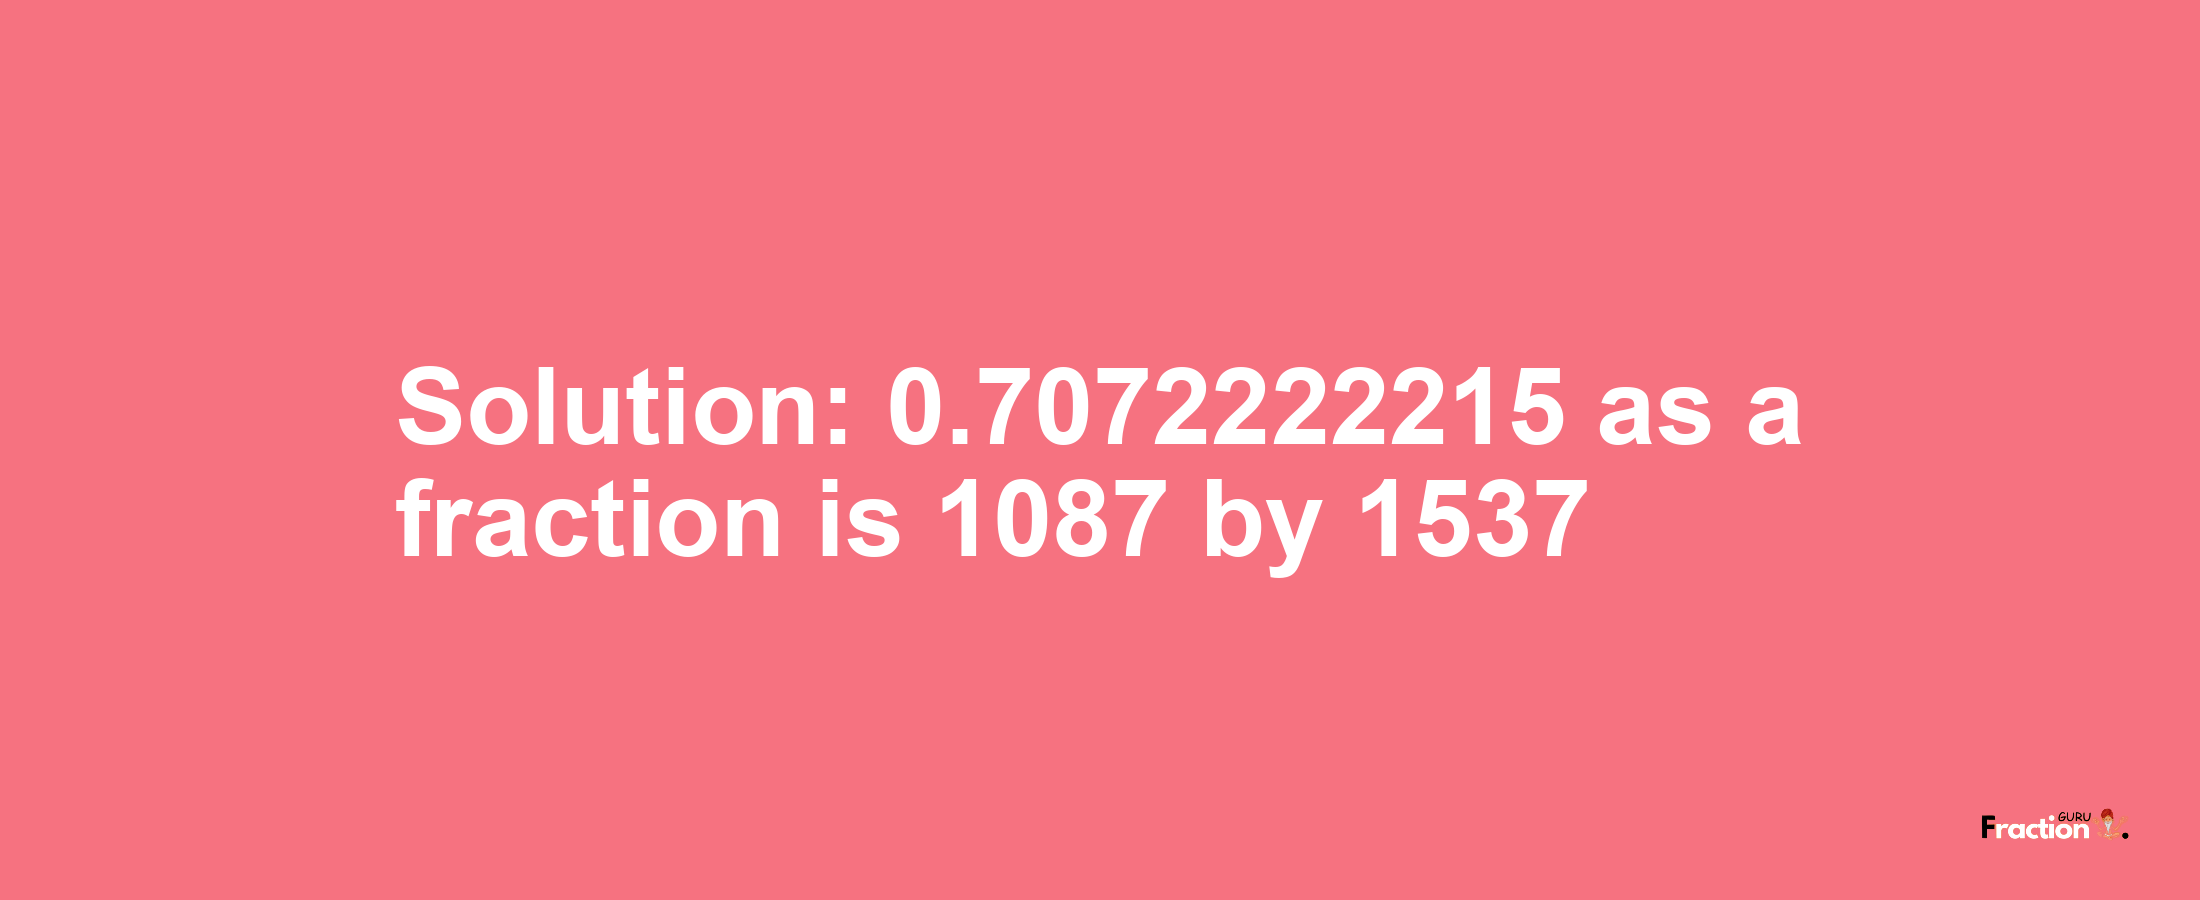 Solution:0.7072222215 as a fraction is 1087/1537